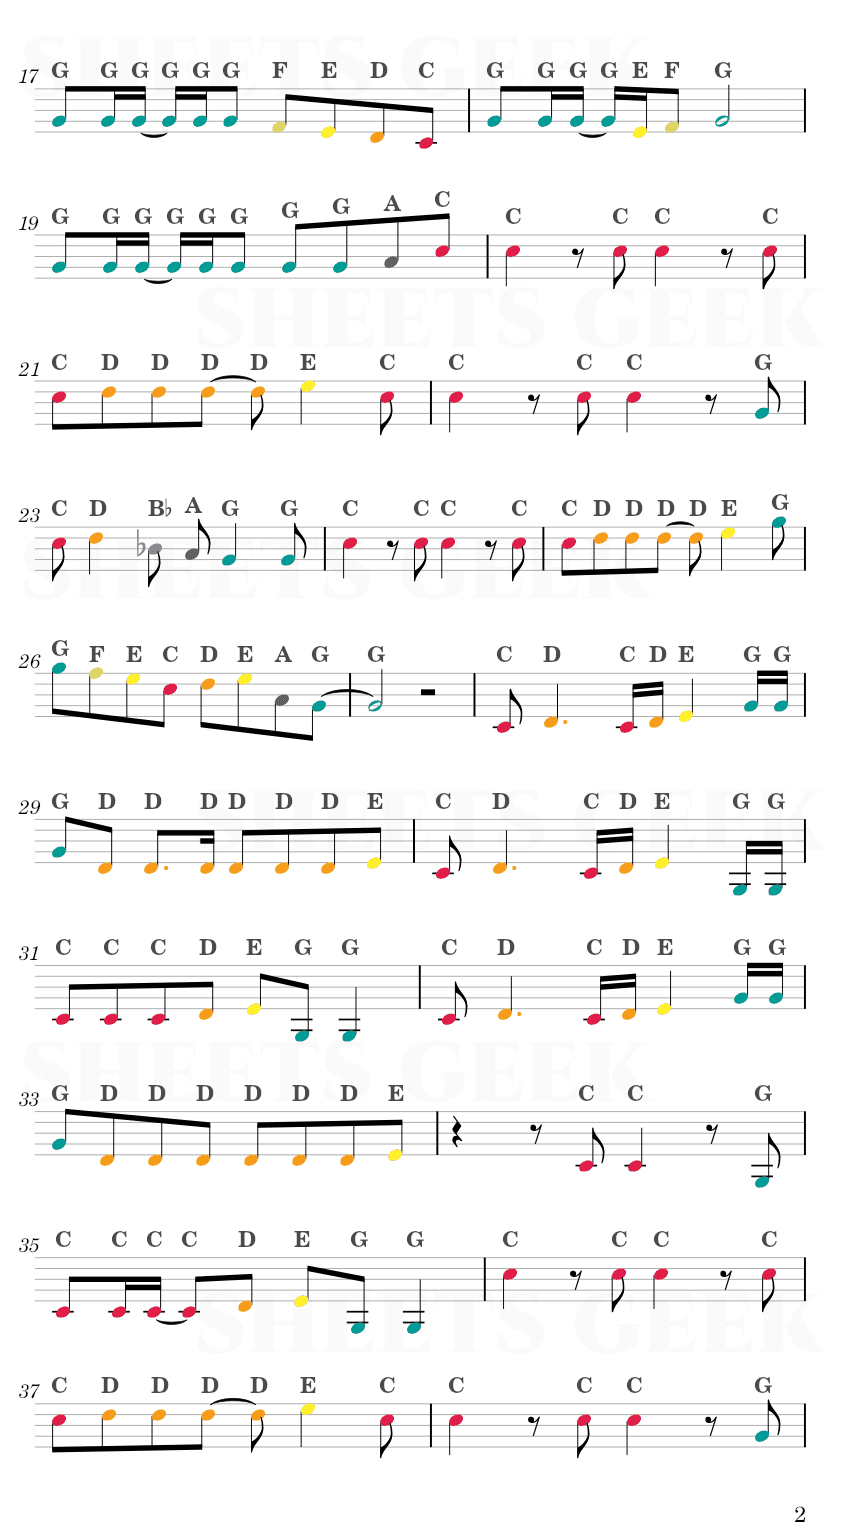 My Universe - Coldplay X BTS Easy Sheet Music Free for piano, keyboard, flute, violin, sax, cello page 2